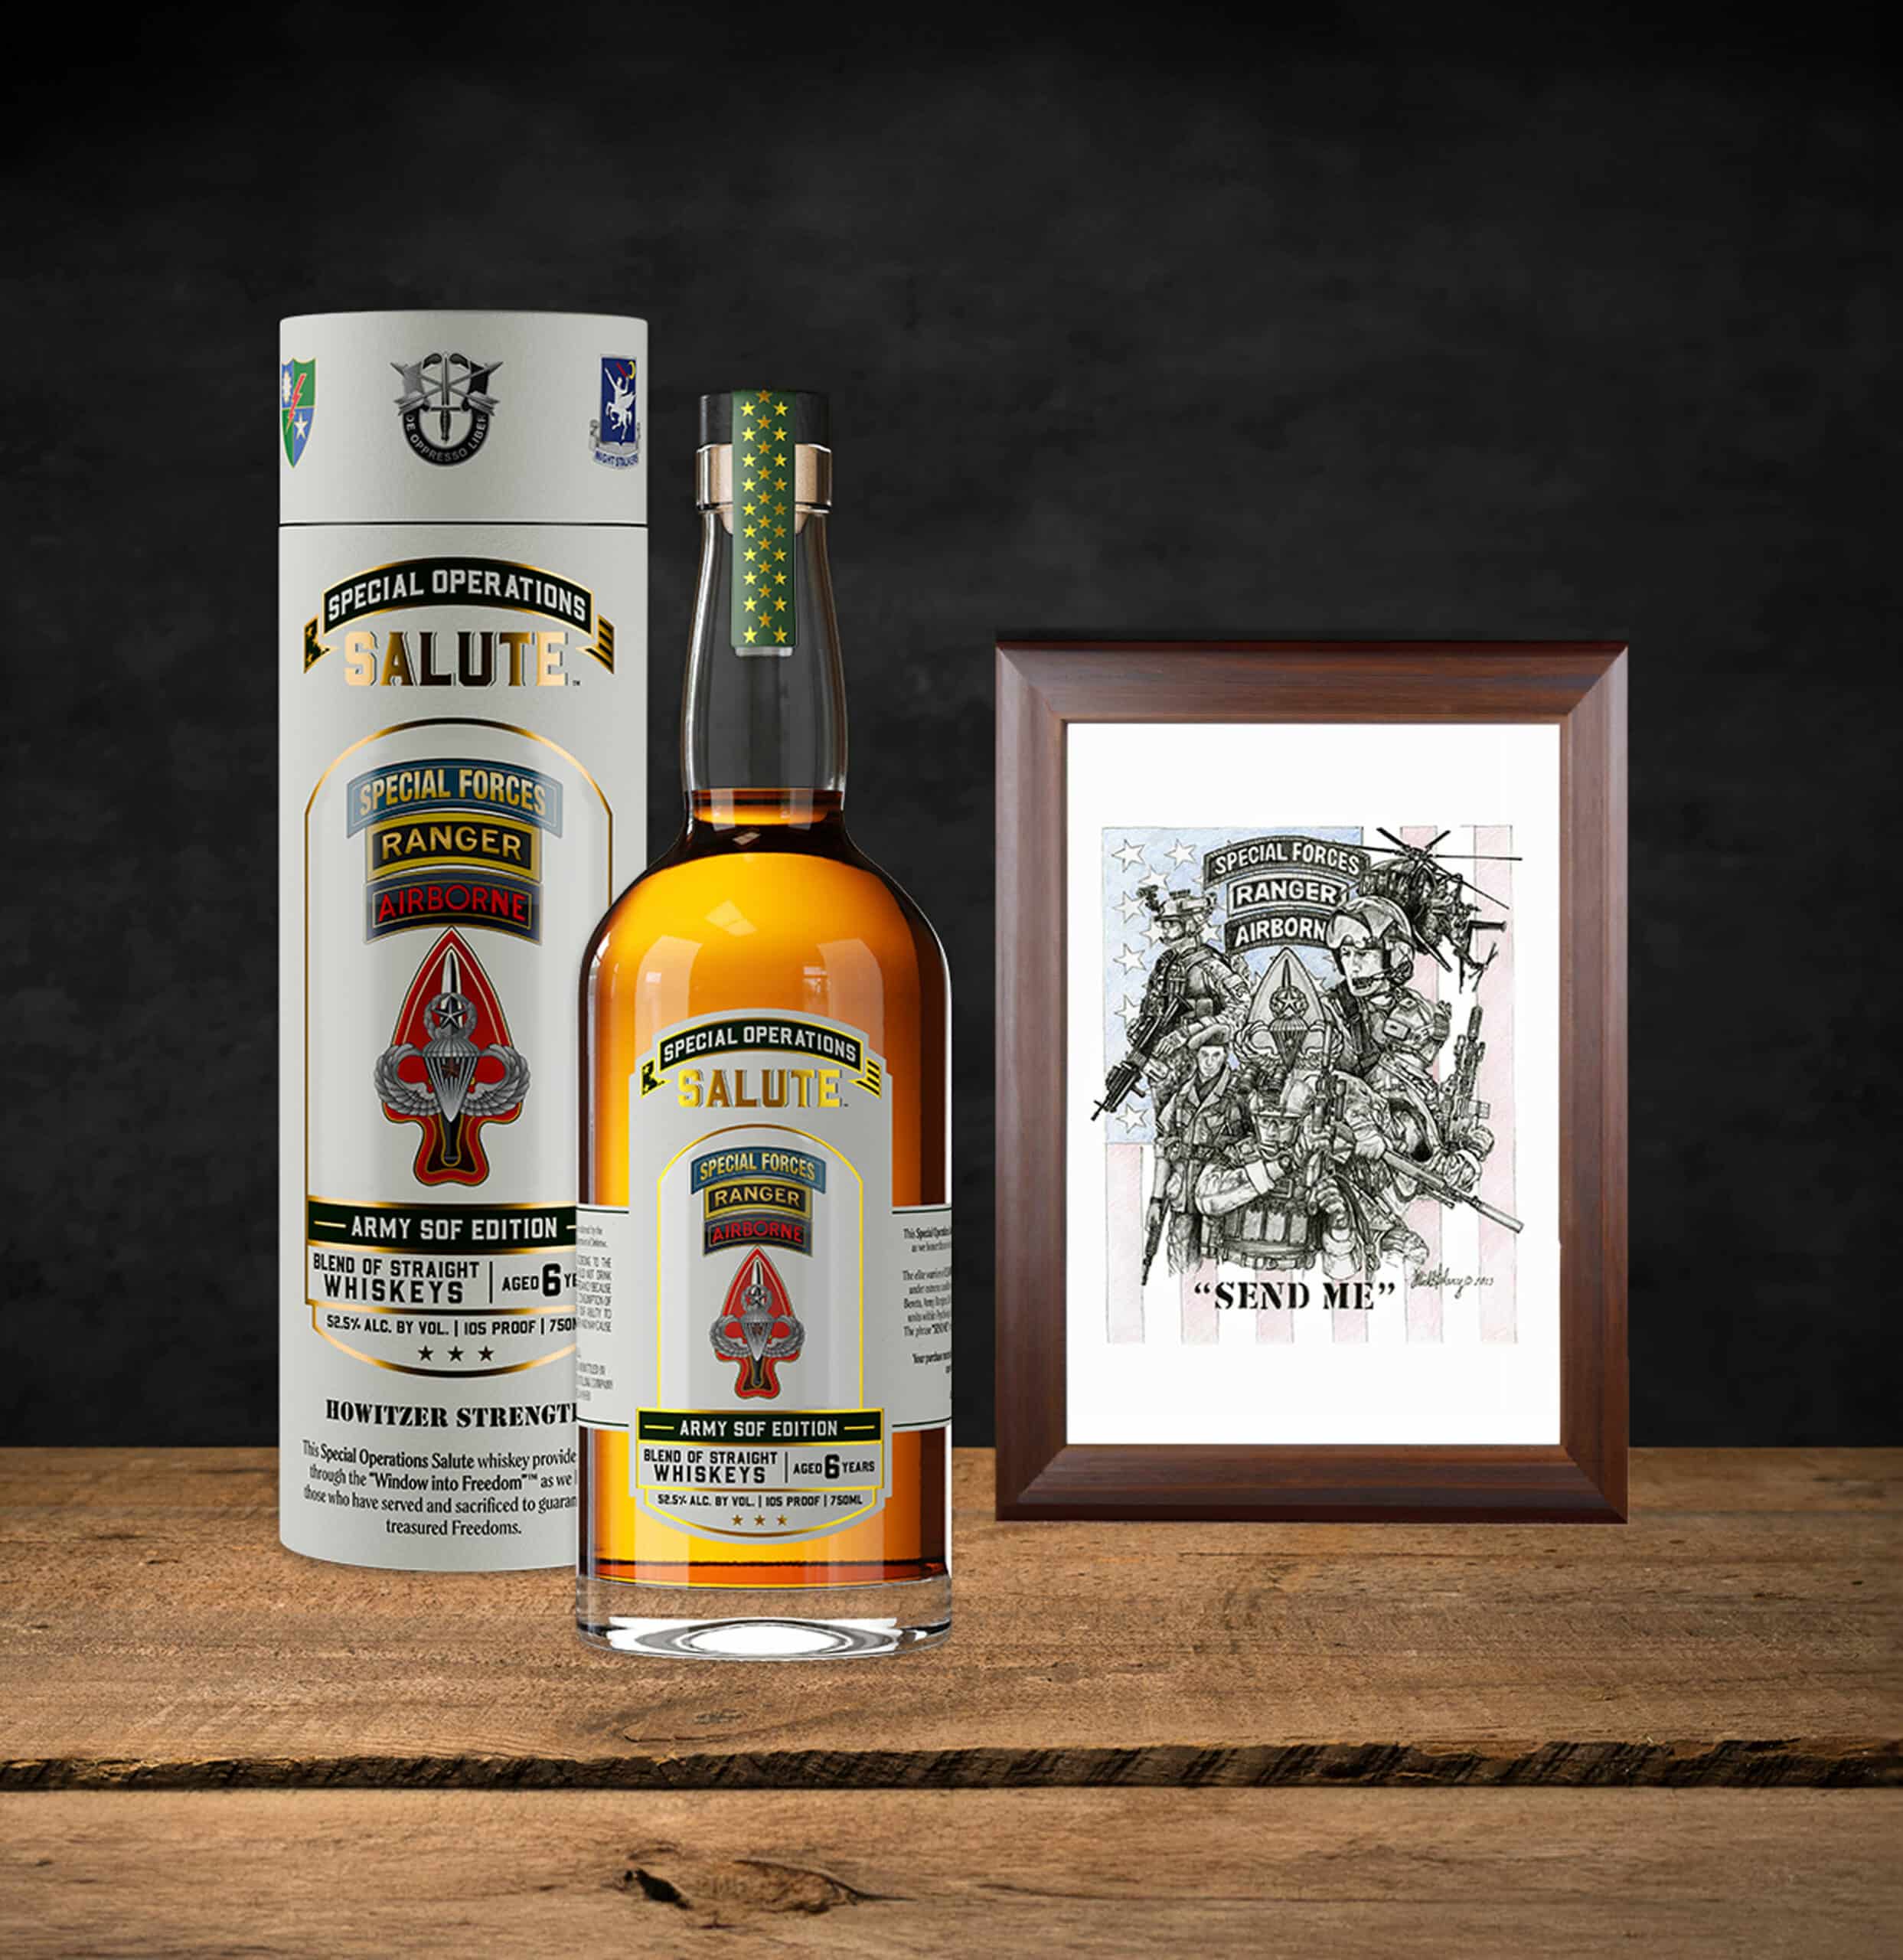 THF + Special Operations Salute™ Whiskey